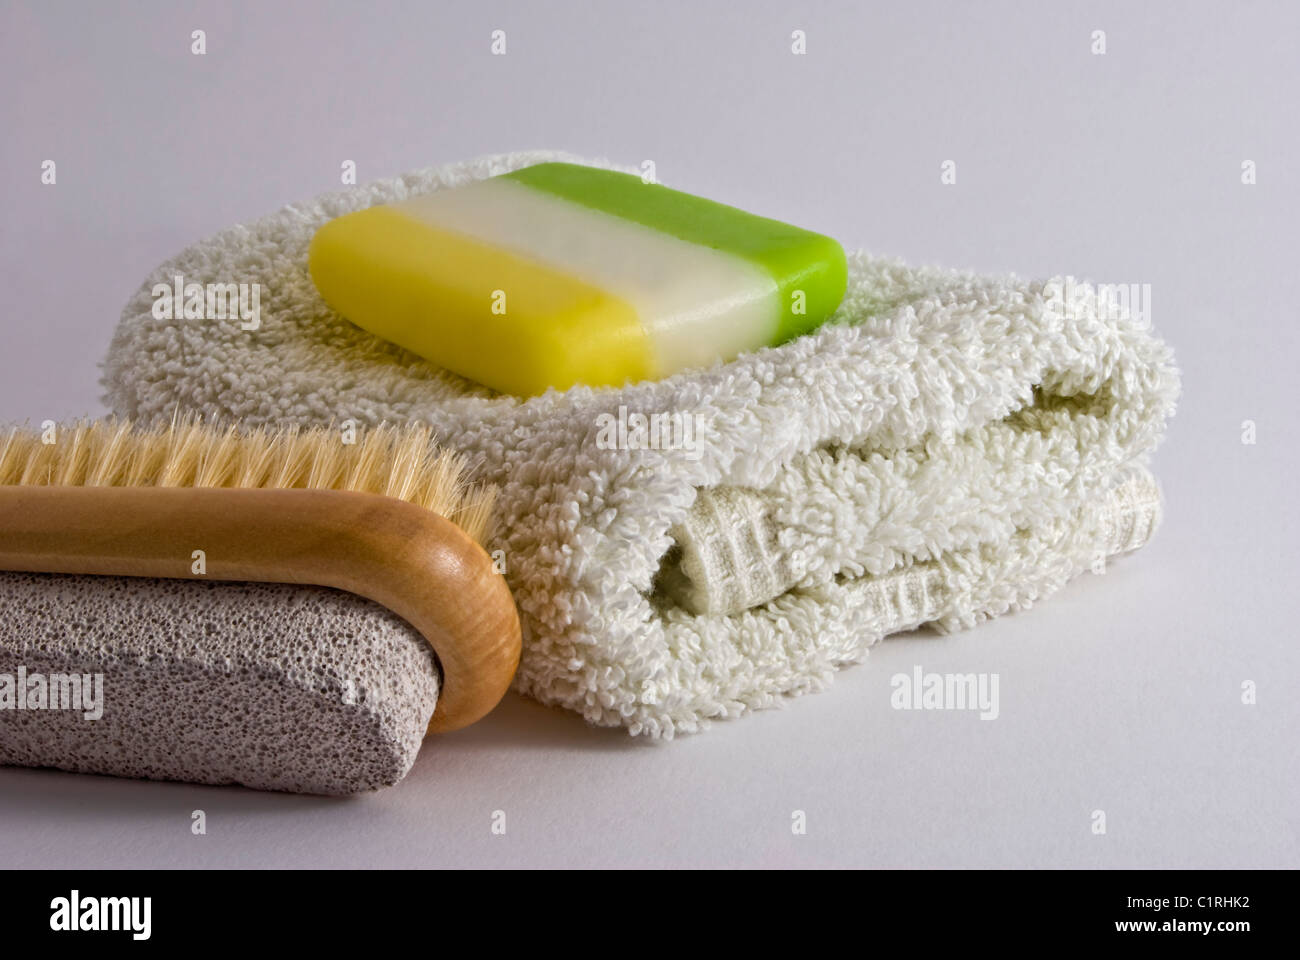 This photograph is part of a series of bathroom related lightbox images. Stock Photo